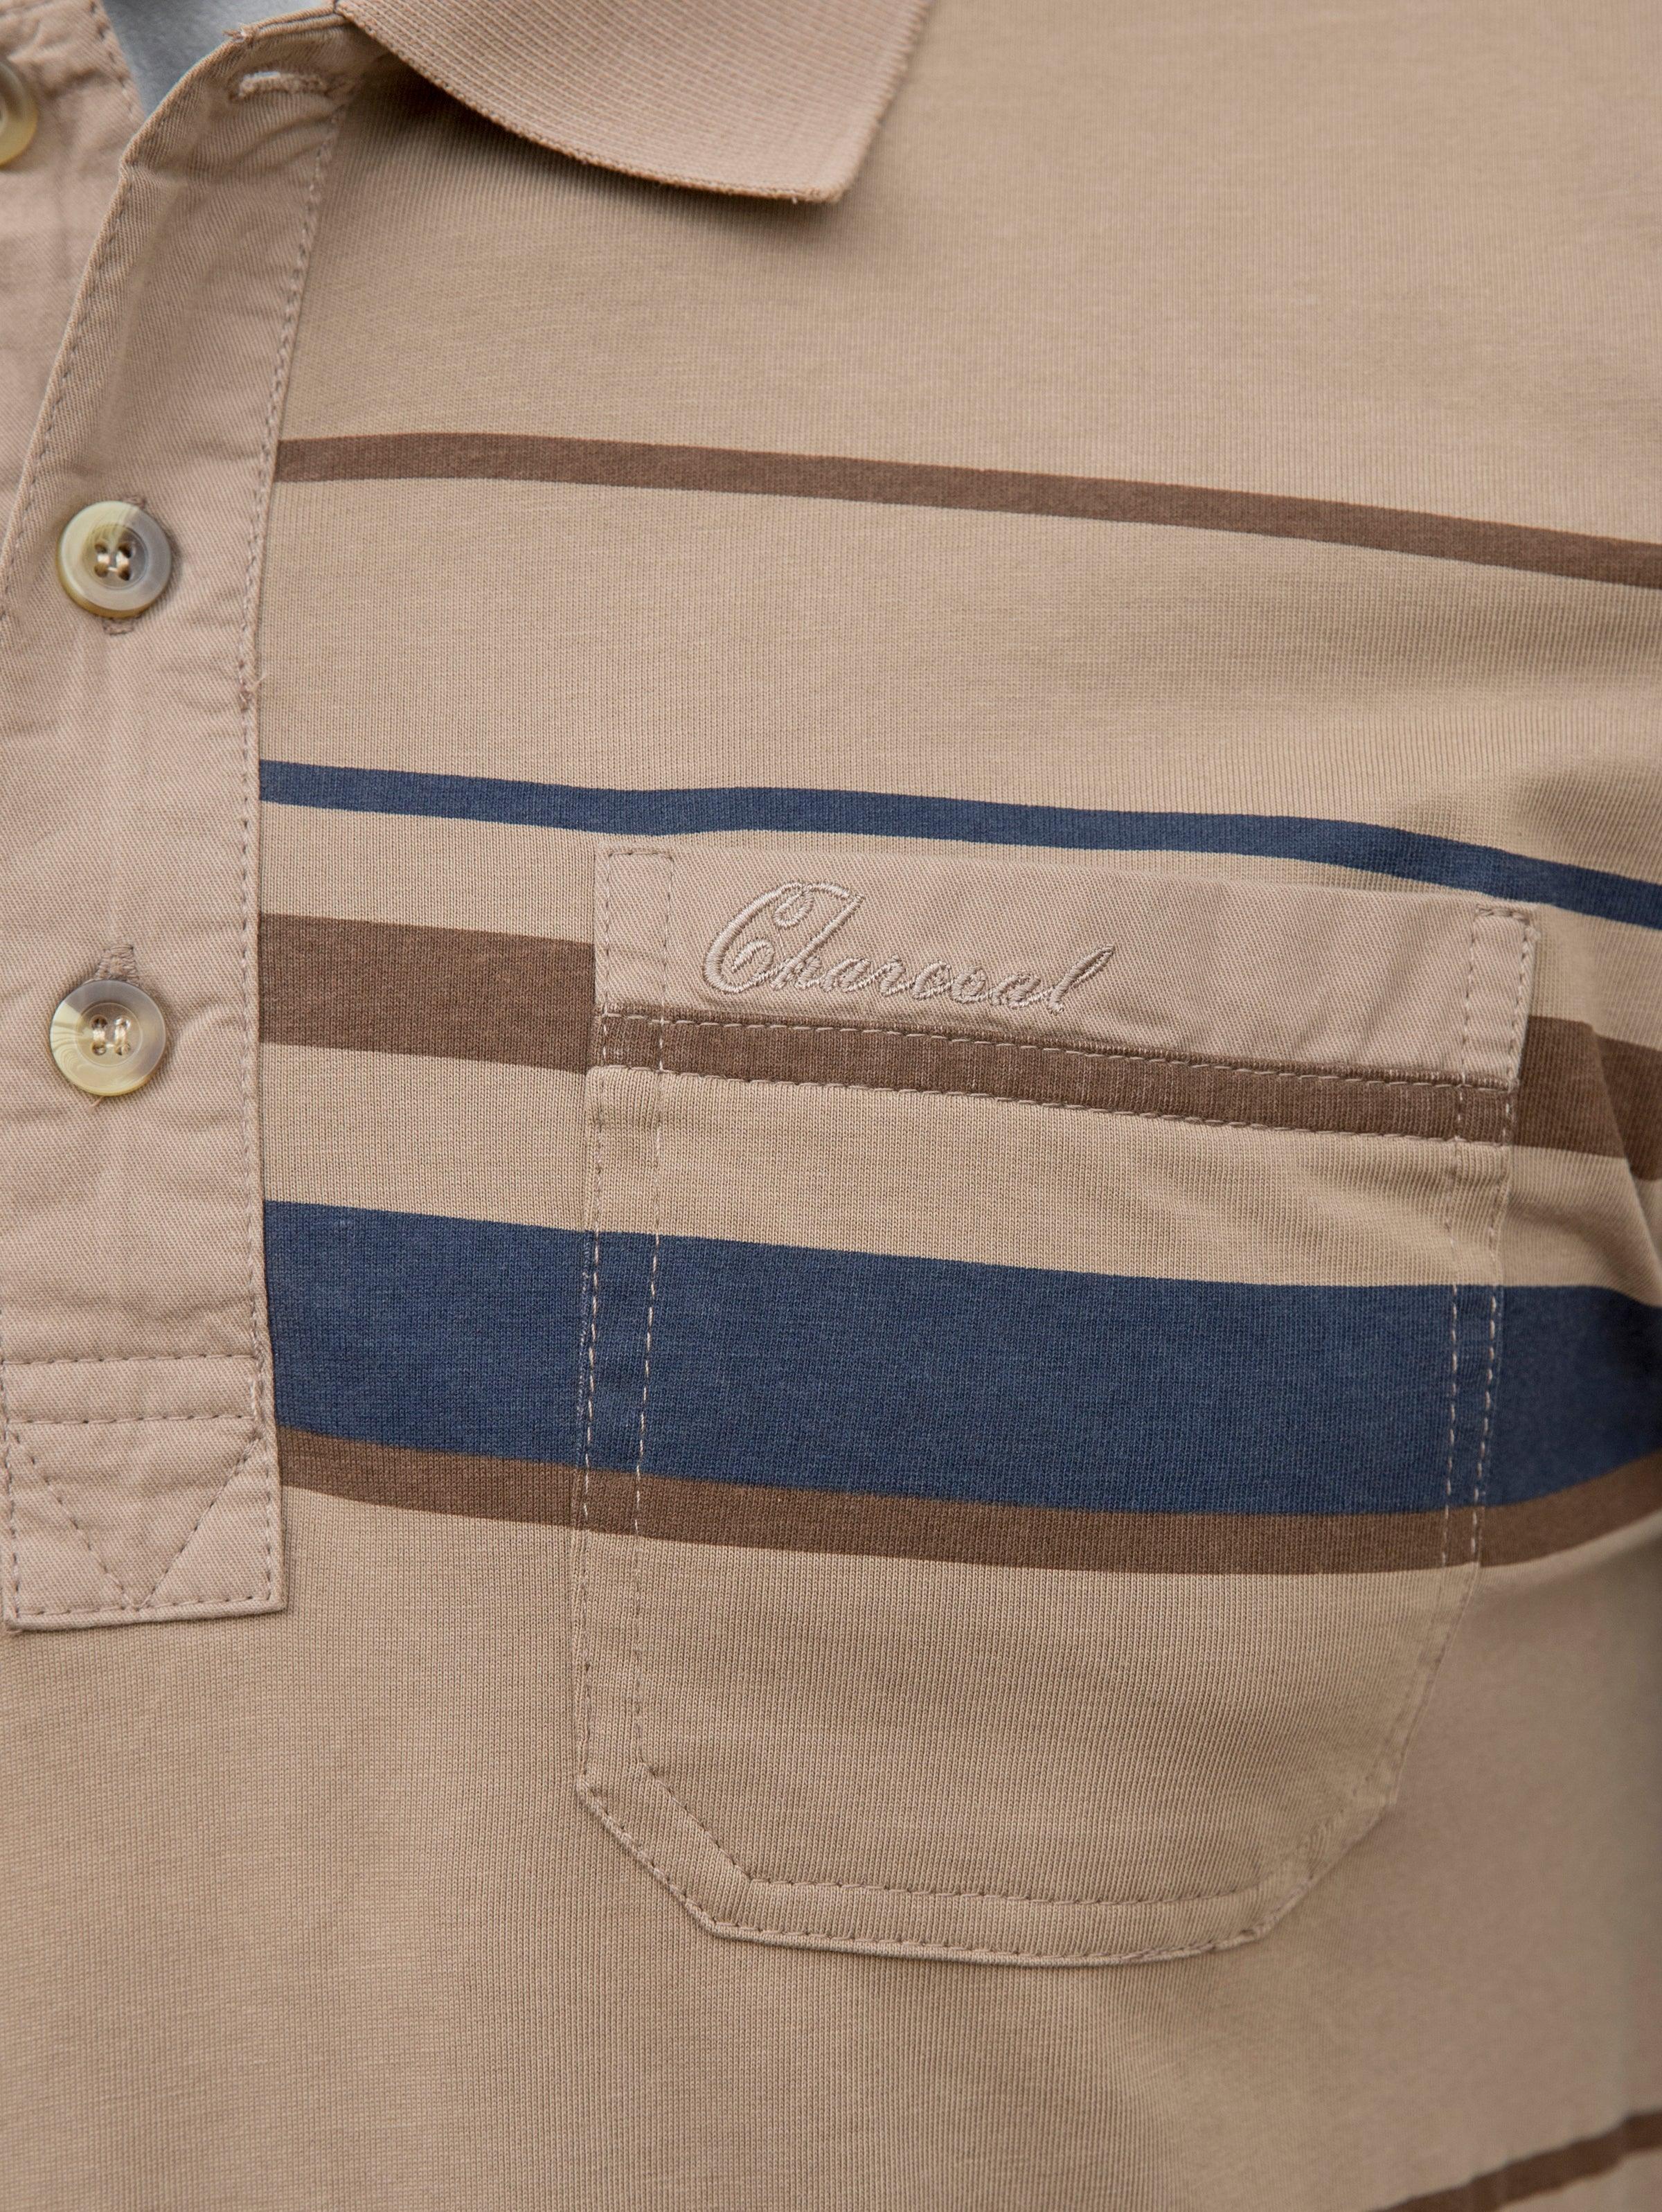 T Shirt Polo Light Brown at Charcoal Clothing